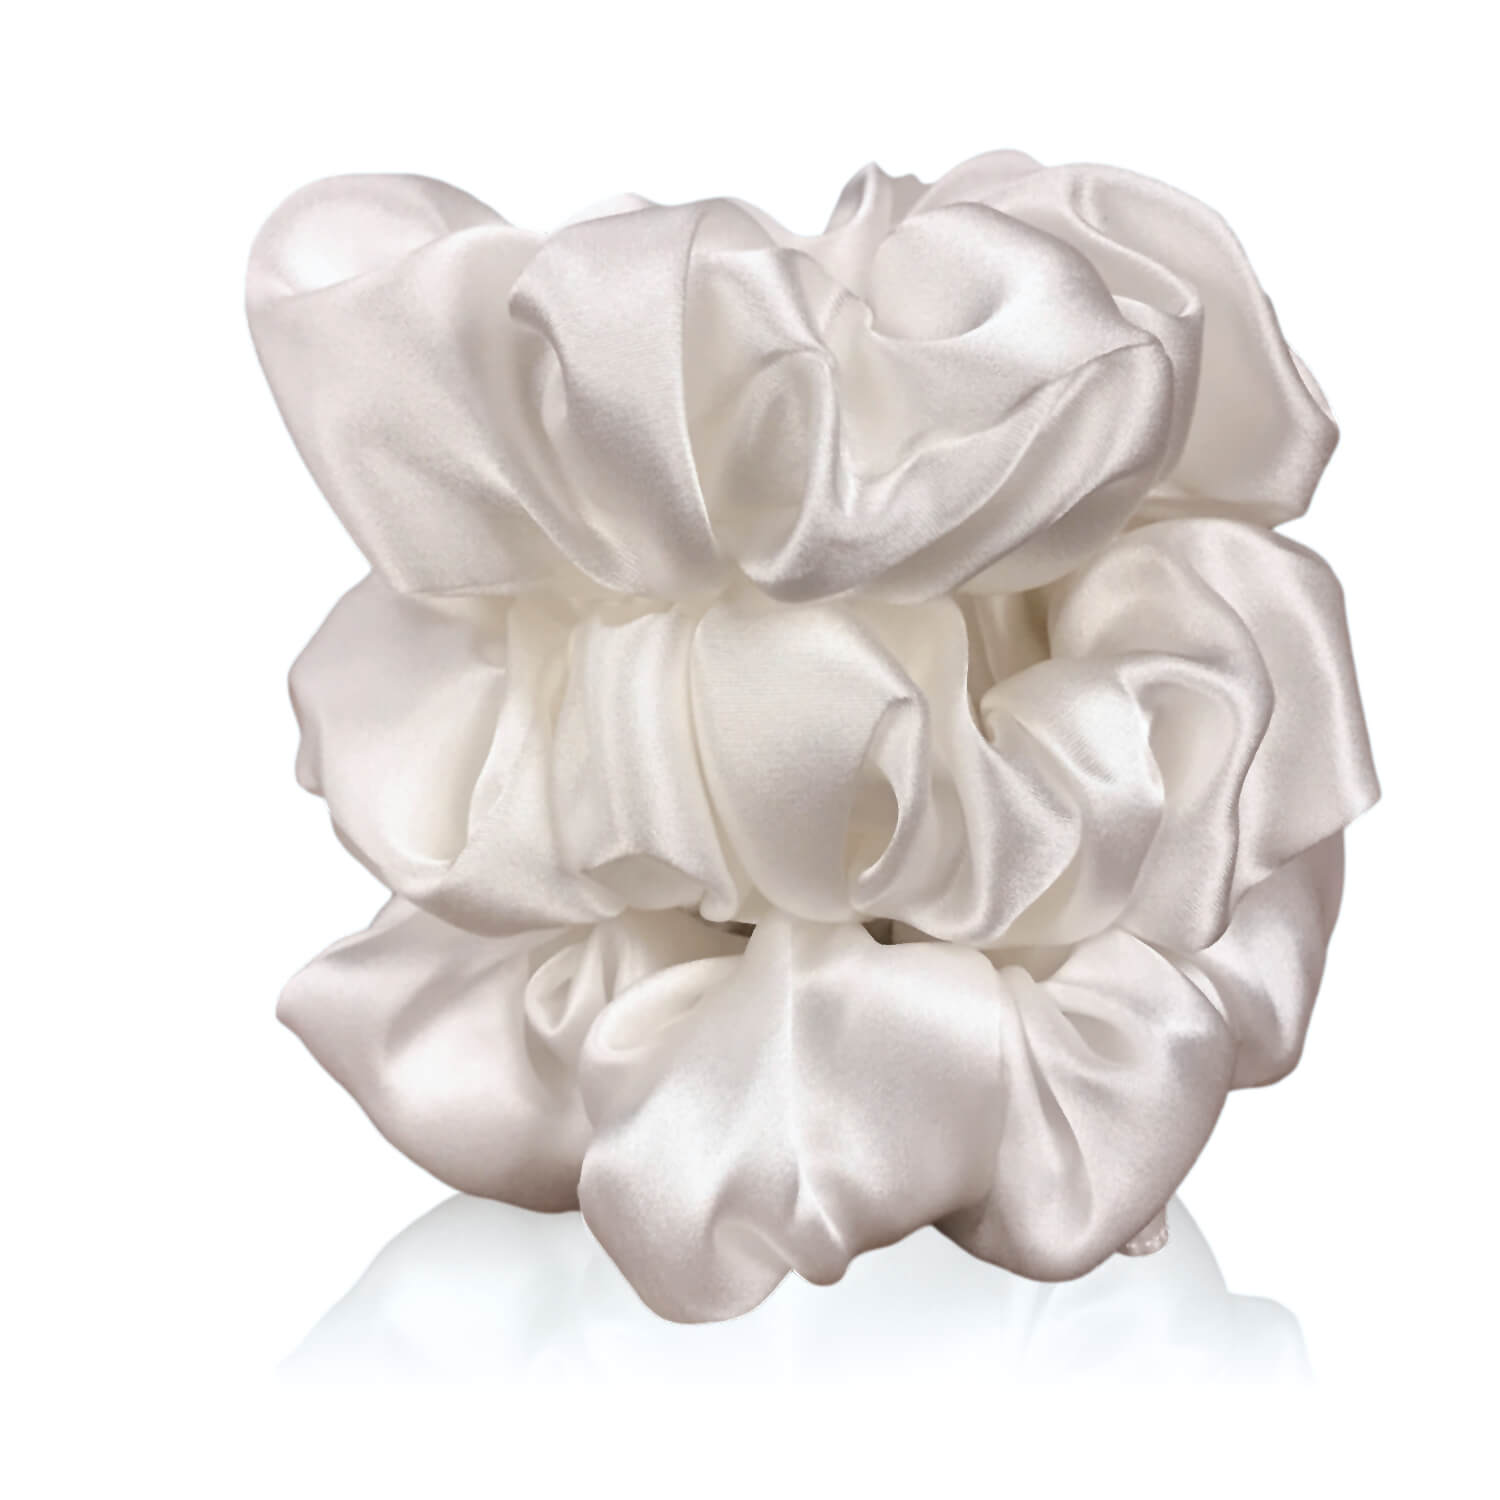 Undyed ivory silk scrunchies by celestial silk stacked with a white background